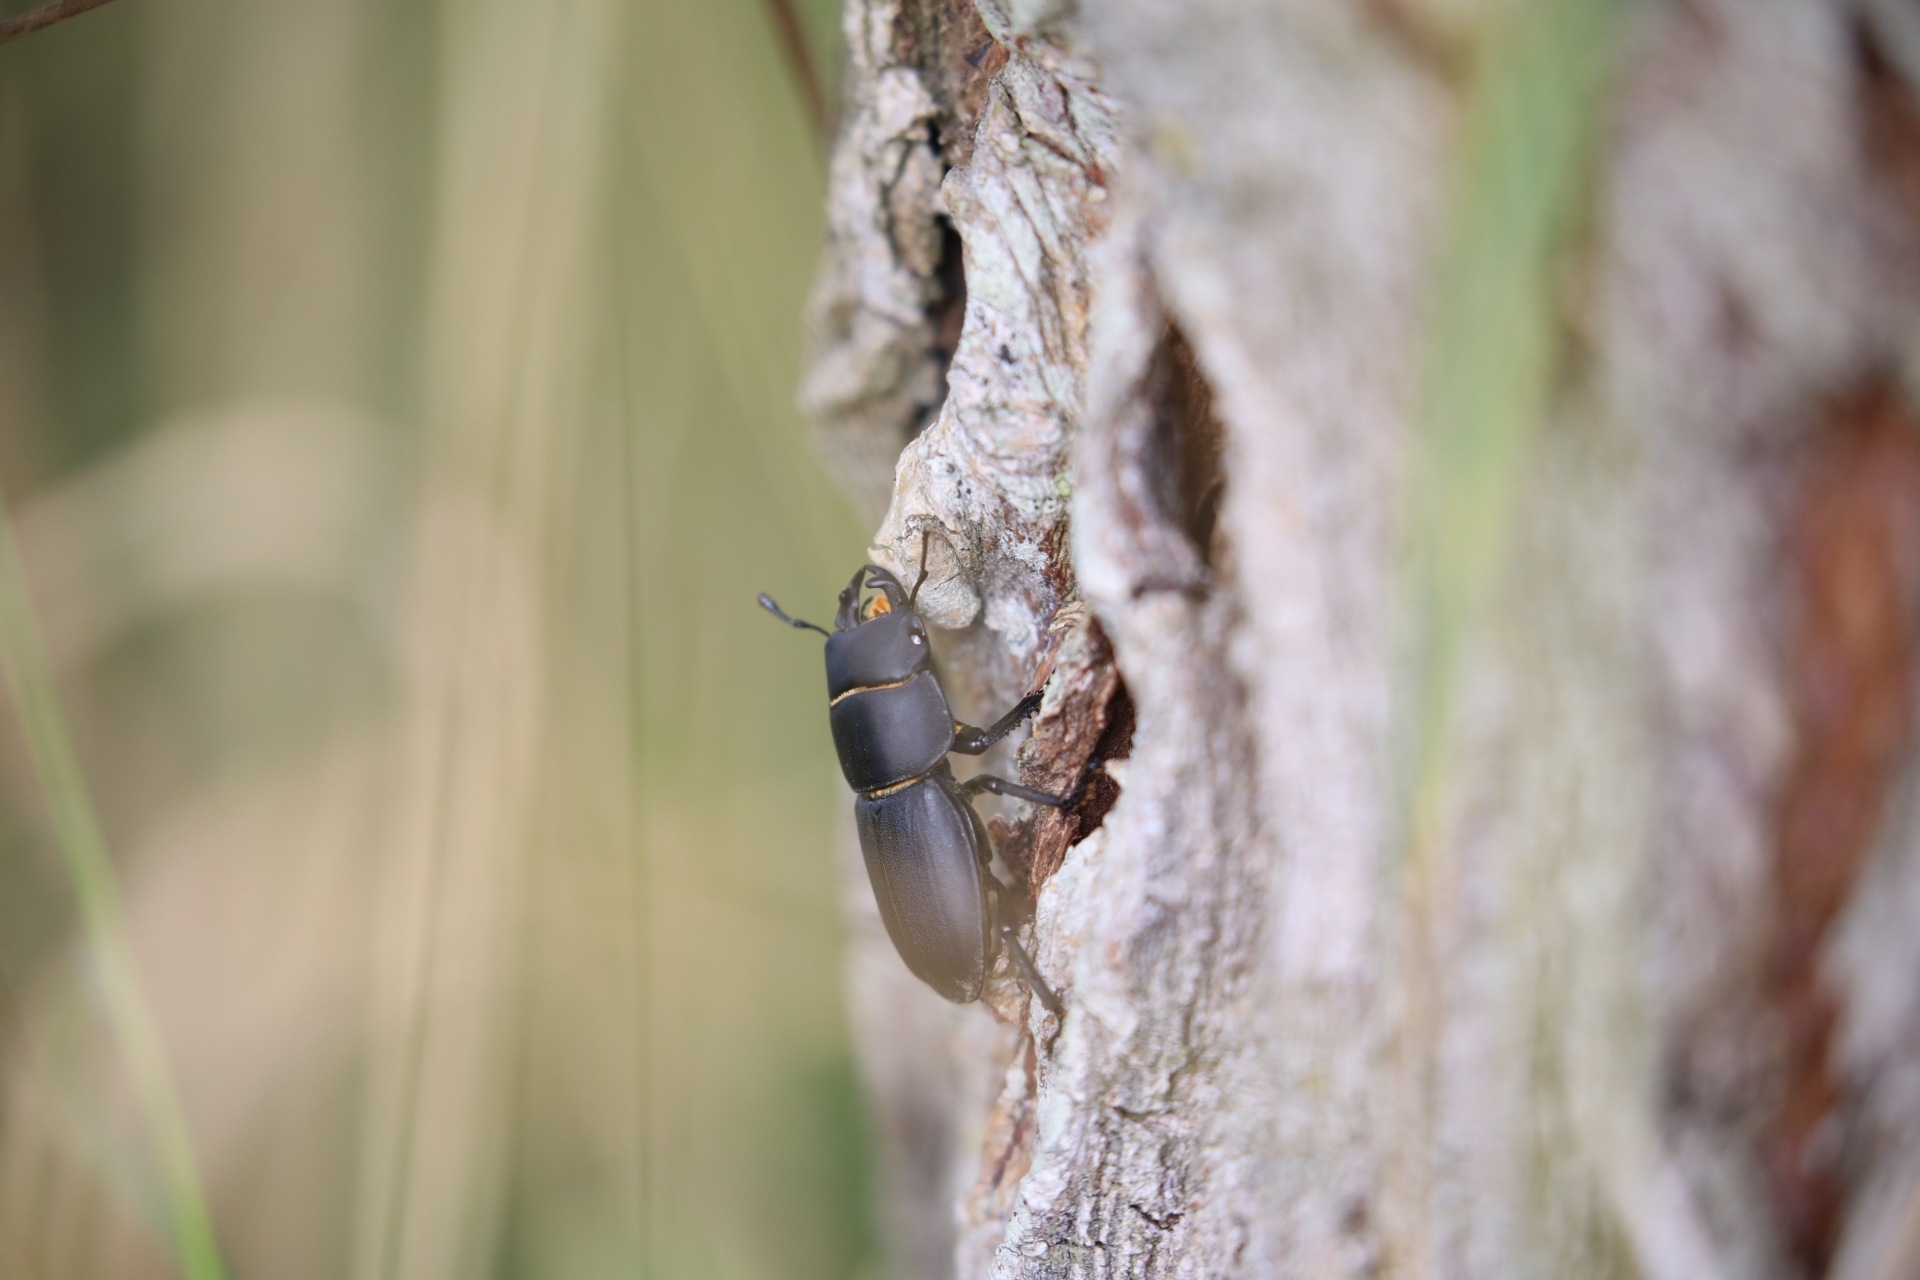 chunky black beetle climbing the trunk of a small tree